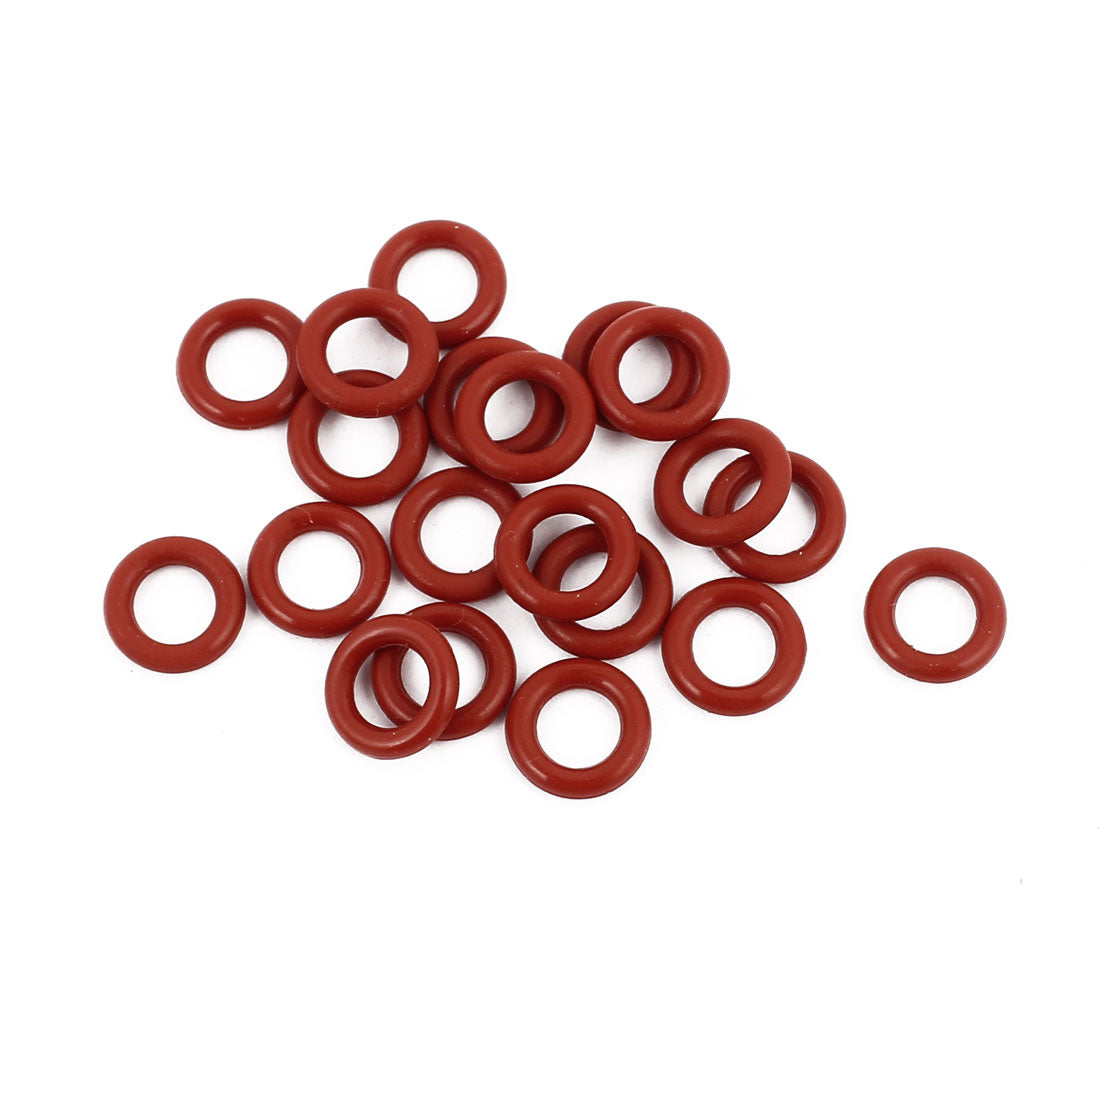 uxcell Uxcell 20Pcs 9mm x 1.9mm Rubber O-rings NBR Heat Resistant Sealing Ring Grommets Red